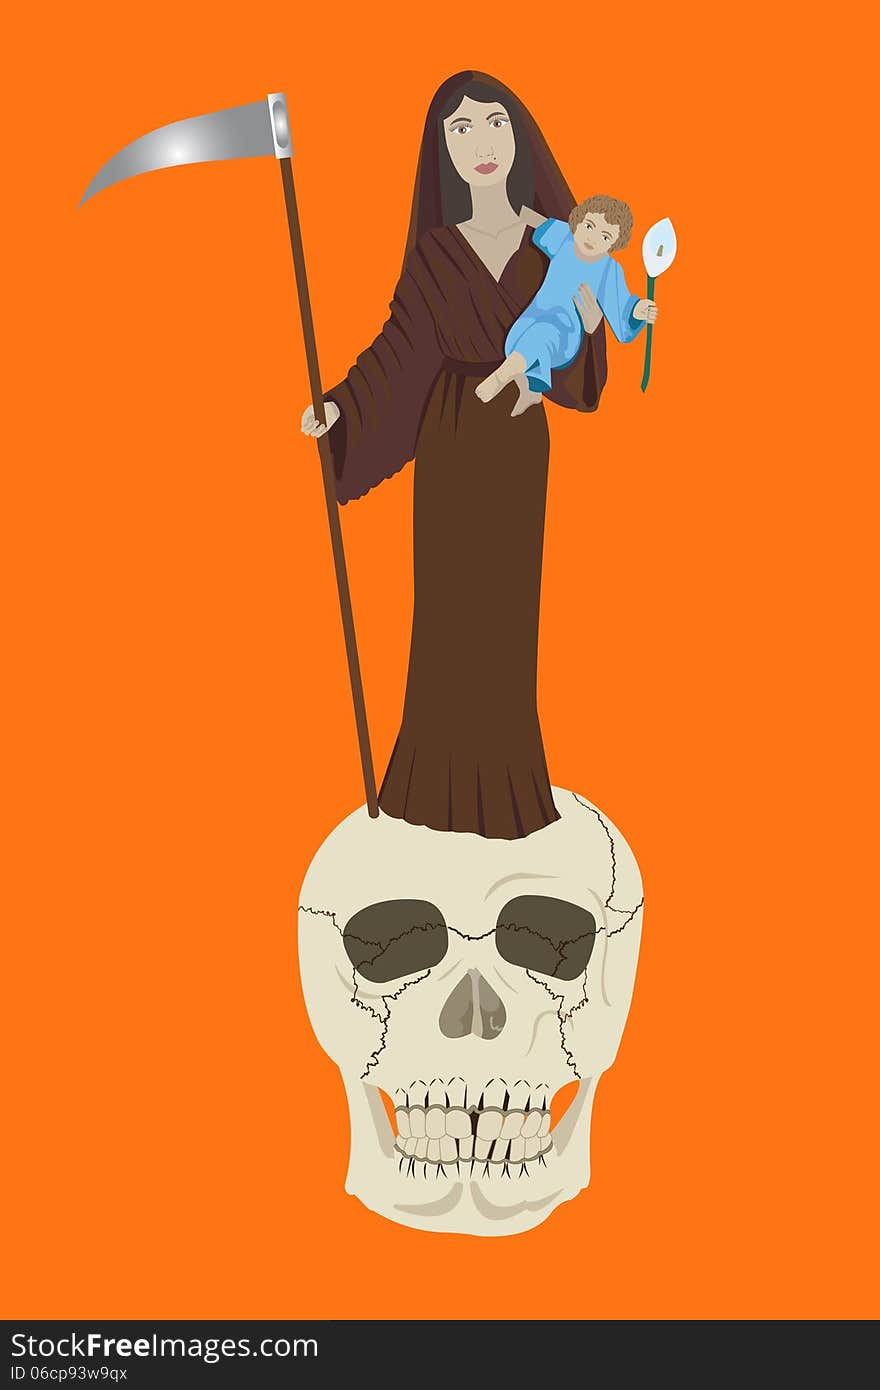 And conceptual vector illustration depicting the virgin mother as consoling death. Load the child in her left arm and right making the scythe, standing on a skull. And conceptual vector illustration depicting the virgin mother as consoling death. Load the child in her left arm and right making the scythe, standing on a skull.